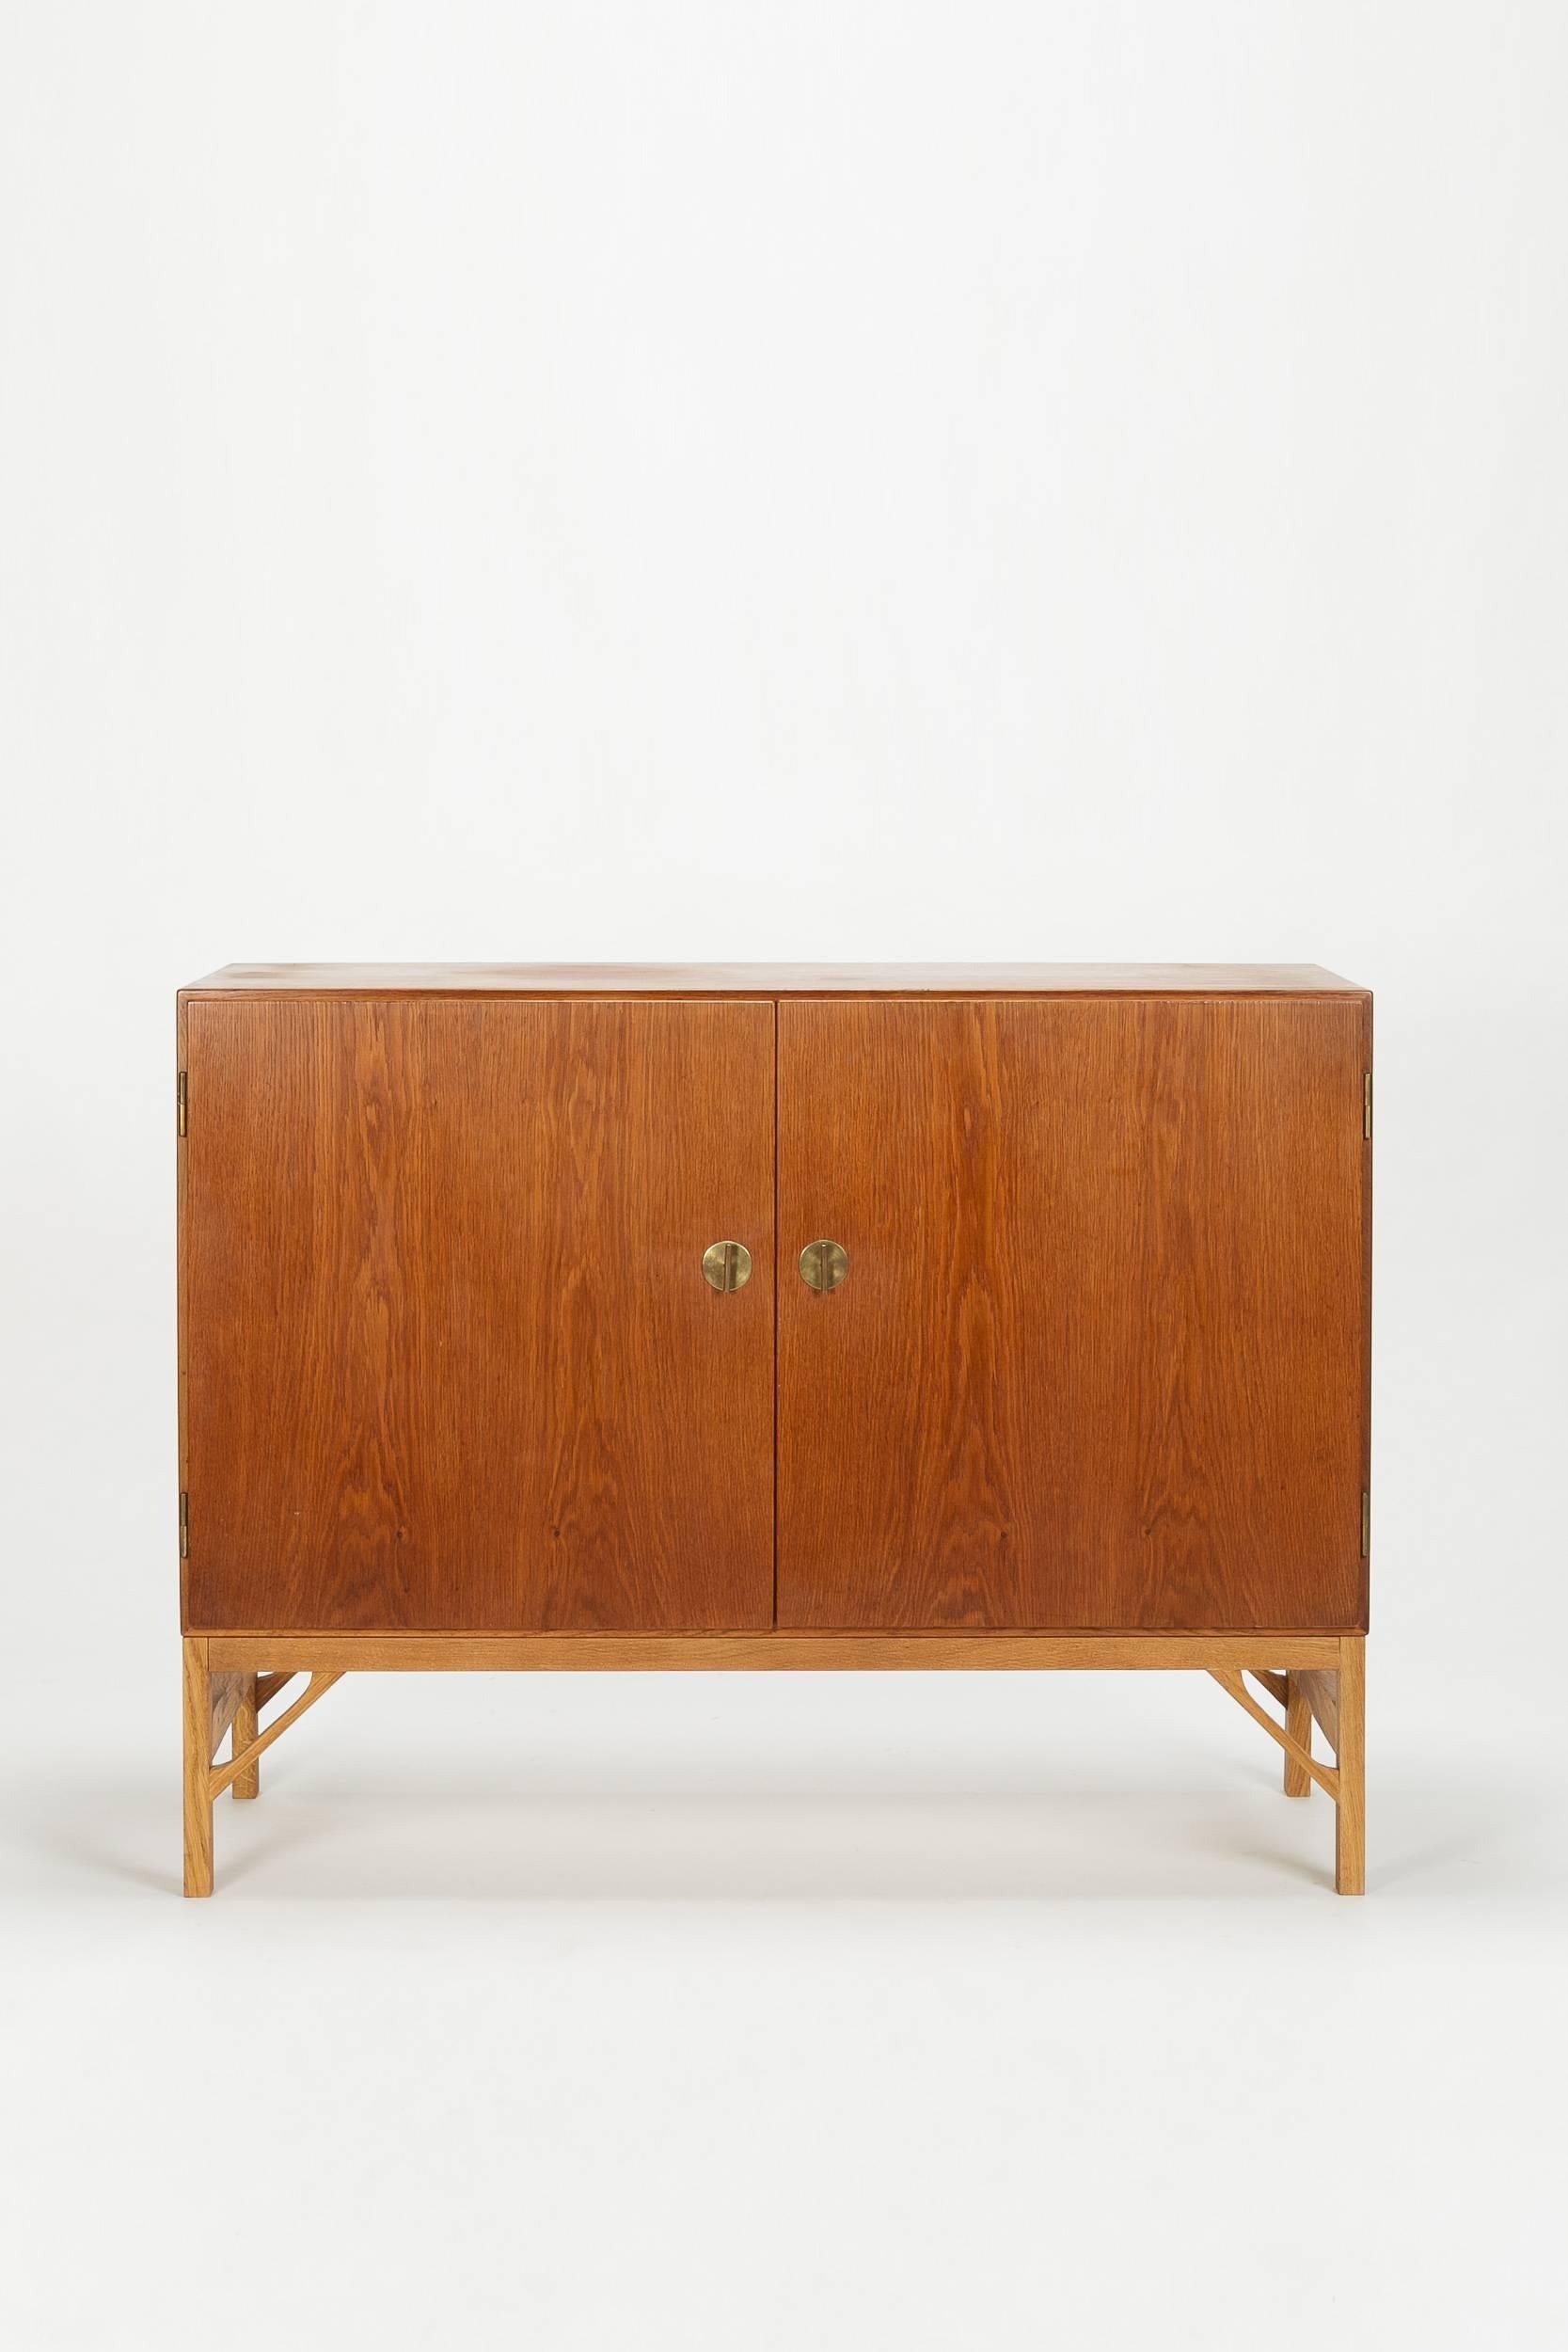 Gorgeous Børge Mogensen highboard A232 manufactured by FDB Mobler Denmark in the 1950s. Beautiful combination of teak (corpus) and finely wrought oak (base), brass fittings. High quality interior made of birch wood, with various adjustable shelves